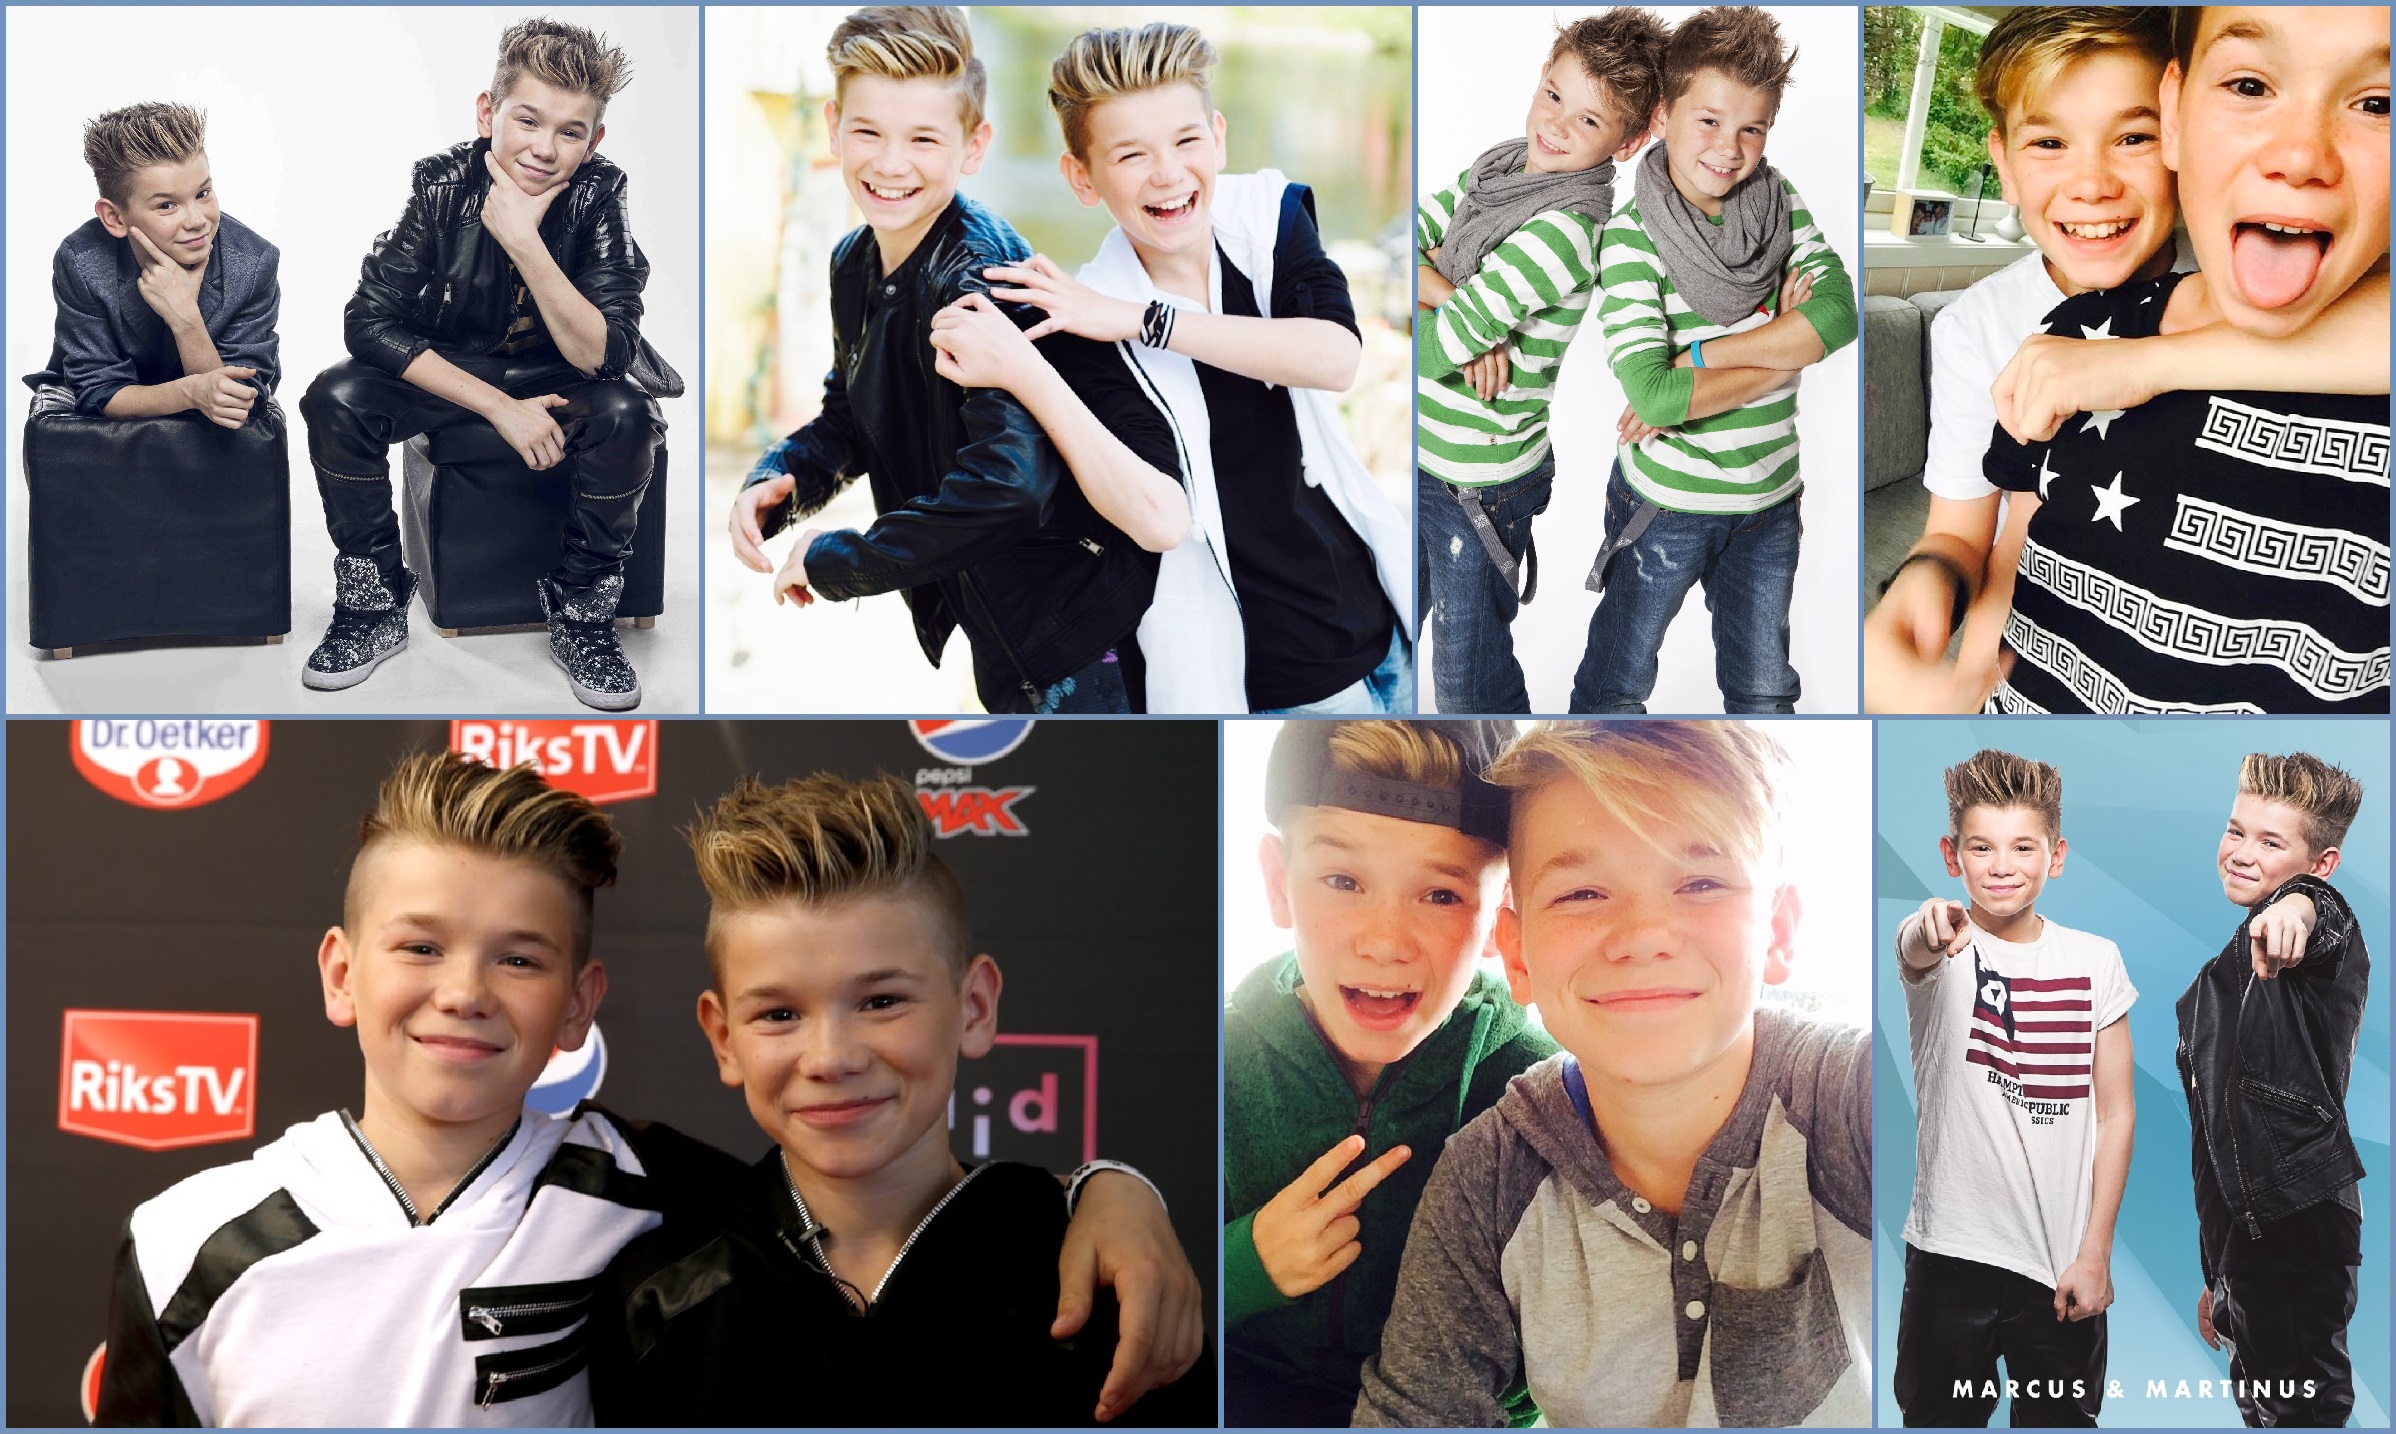 Marcus and Martinus in Fan Creations